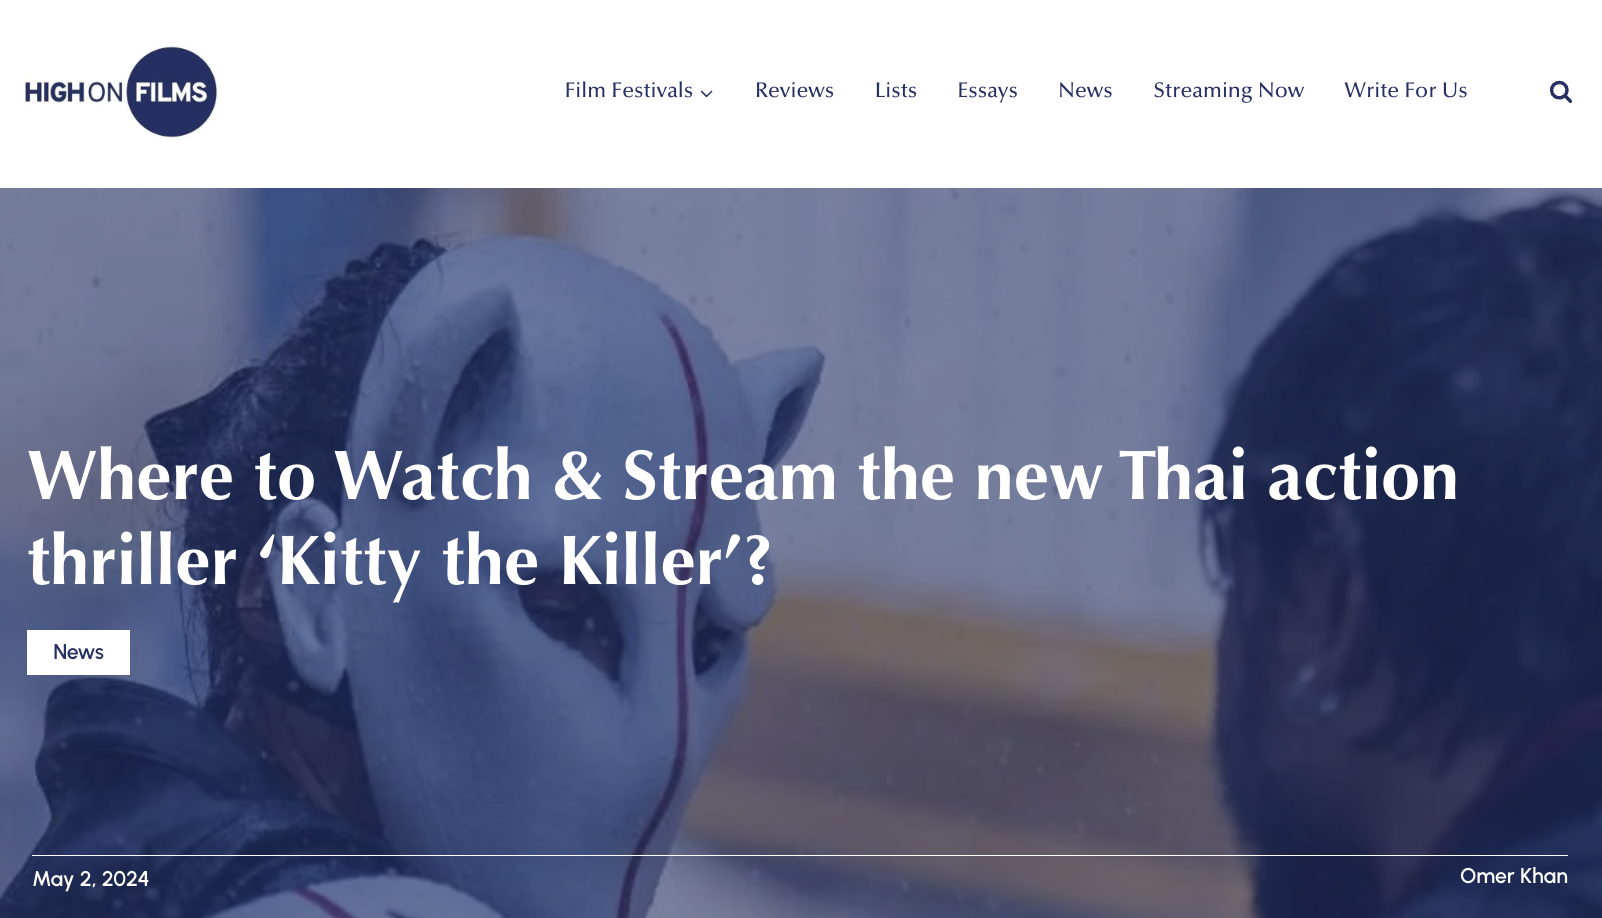 Where to Watch & Stream the new Thai action thriller ‘Kitty the Killer’?